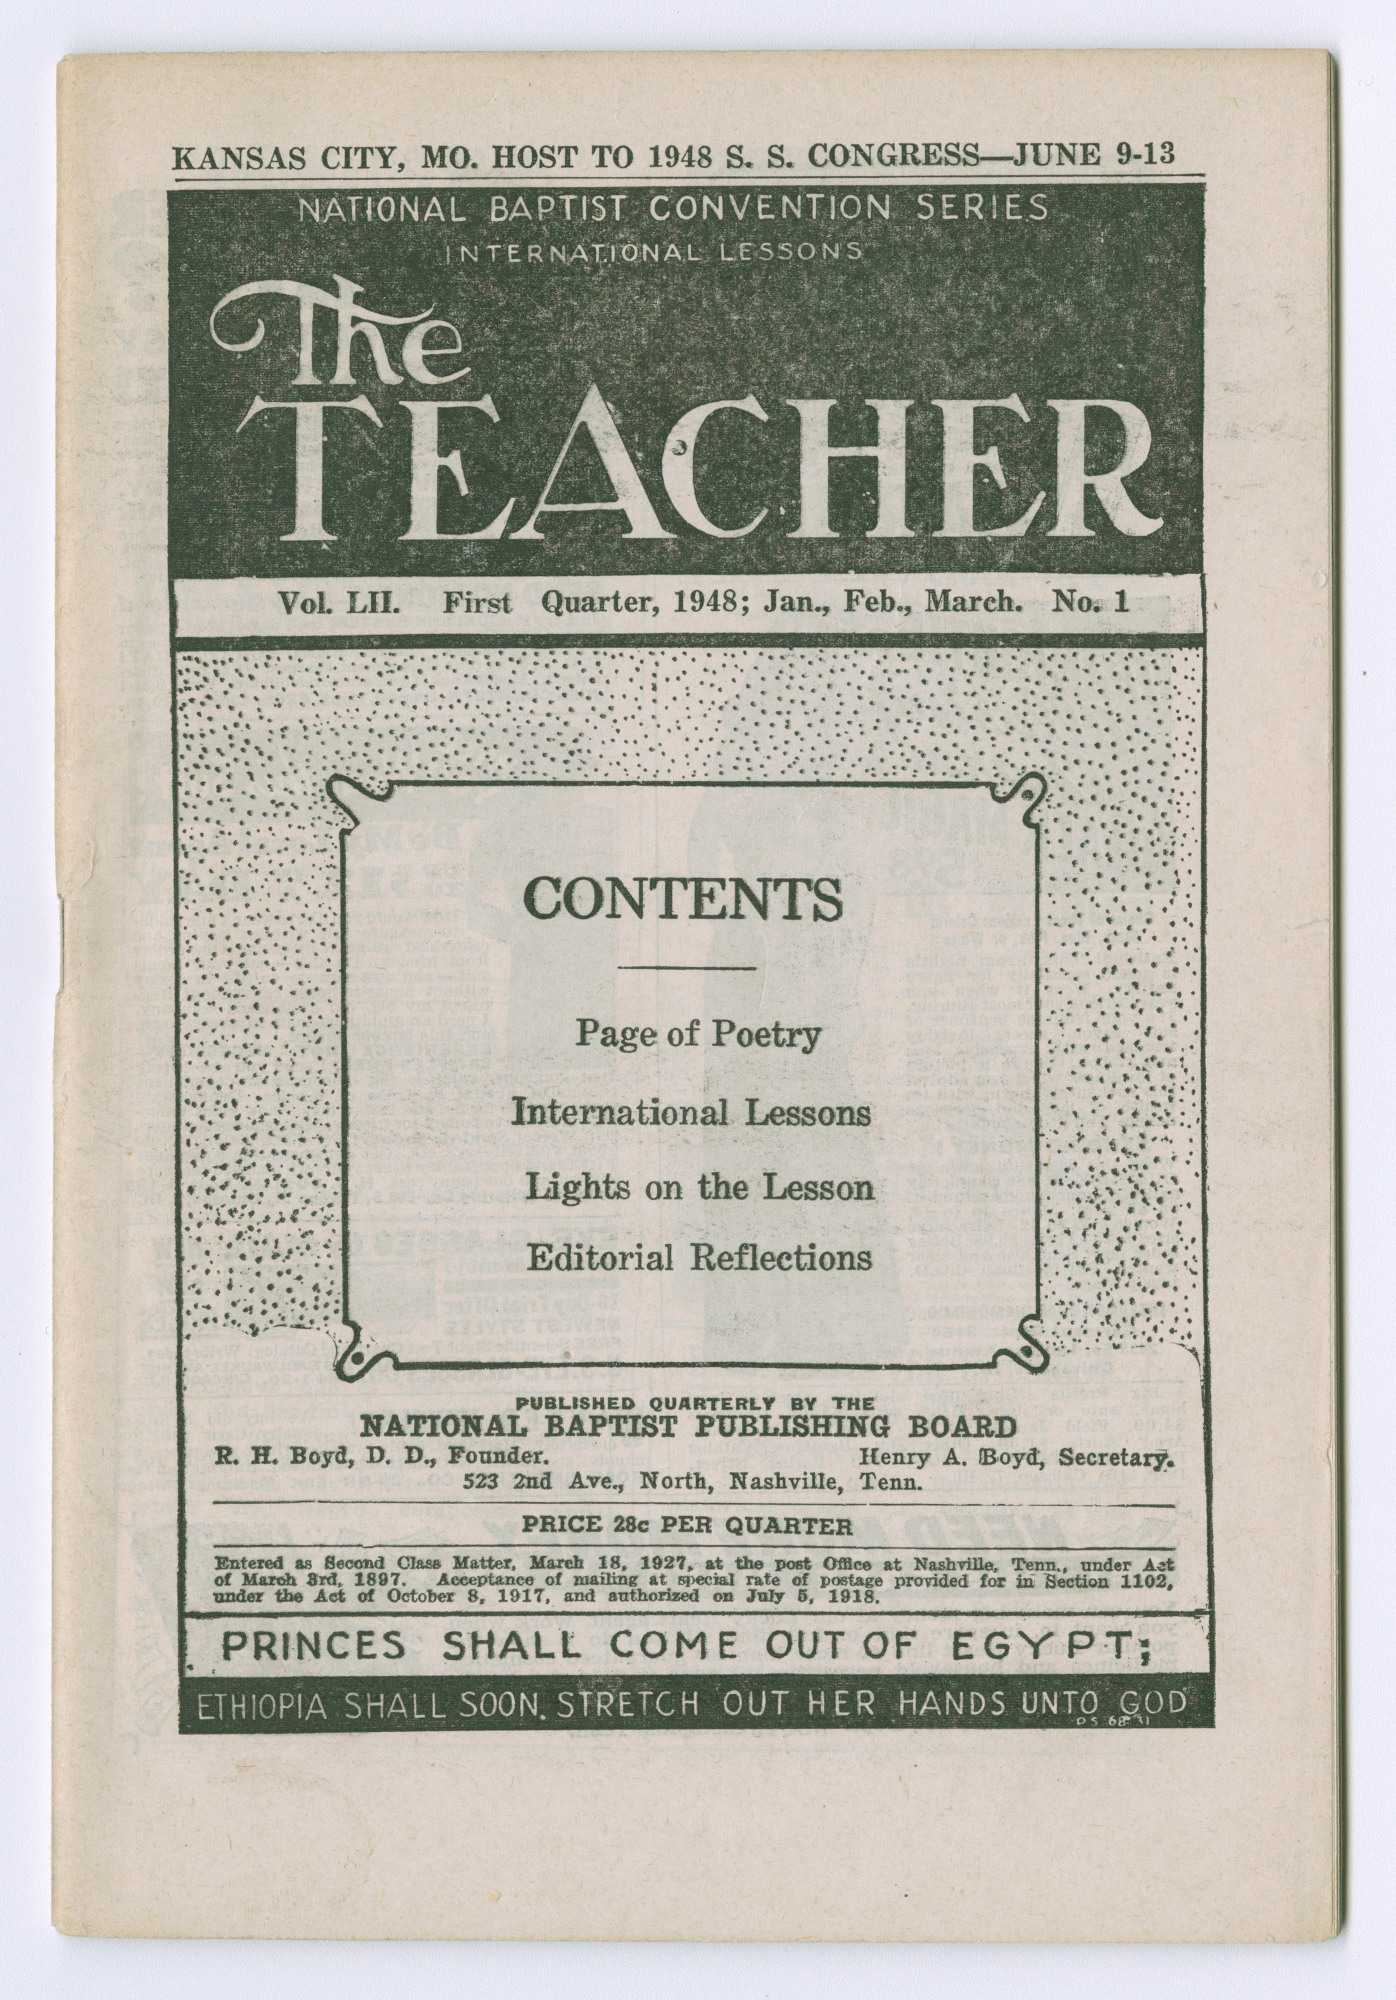 A periodic journal titled The Teacher Vol. 52 No. 1. The journal is printed with black text on newsprint.